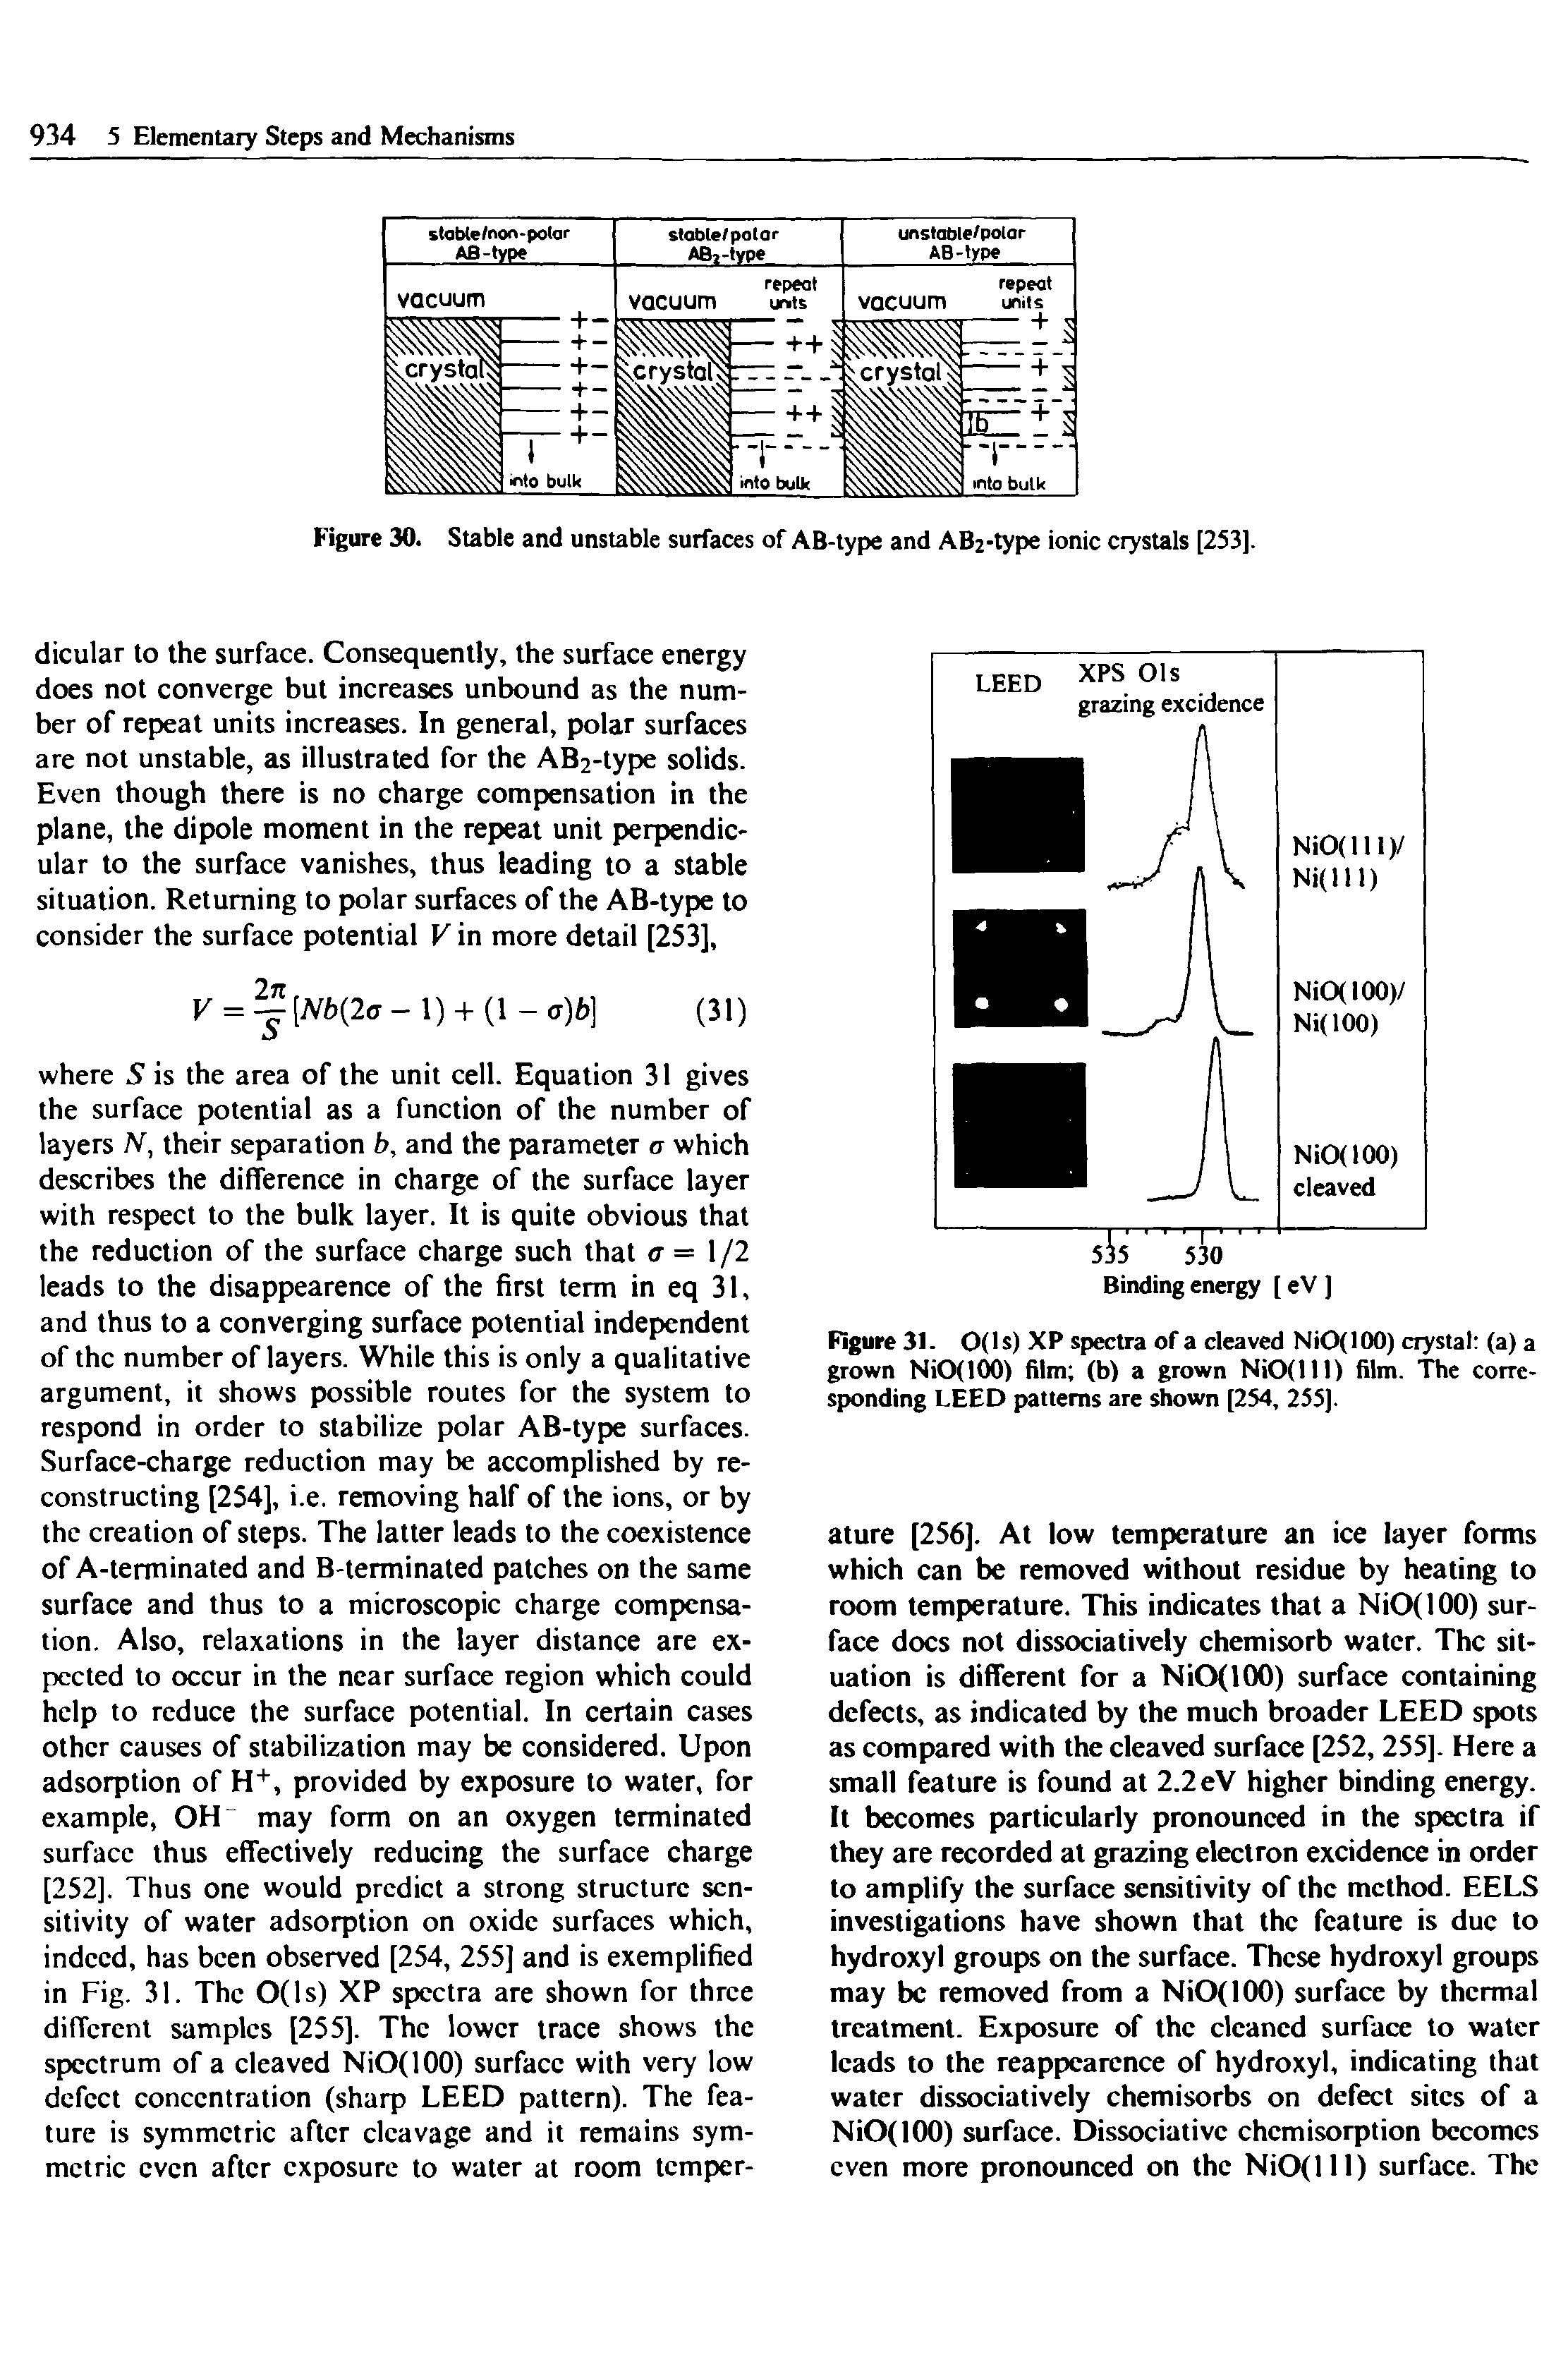 Figure 30. Stable and unstable surfaces of AB-type and AB2-type ionic crystals [253].